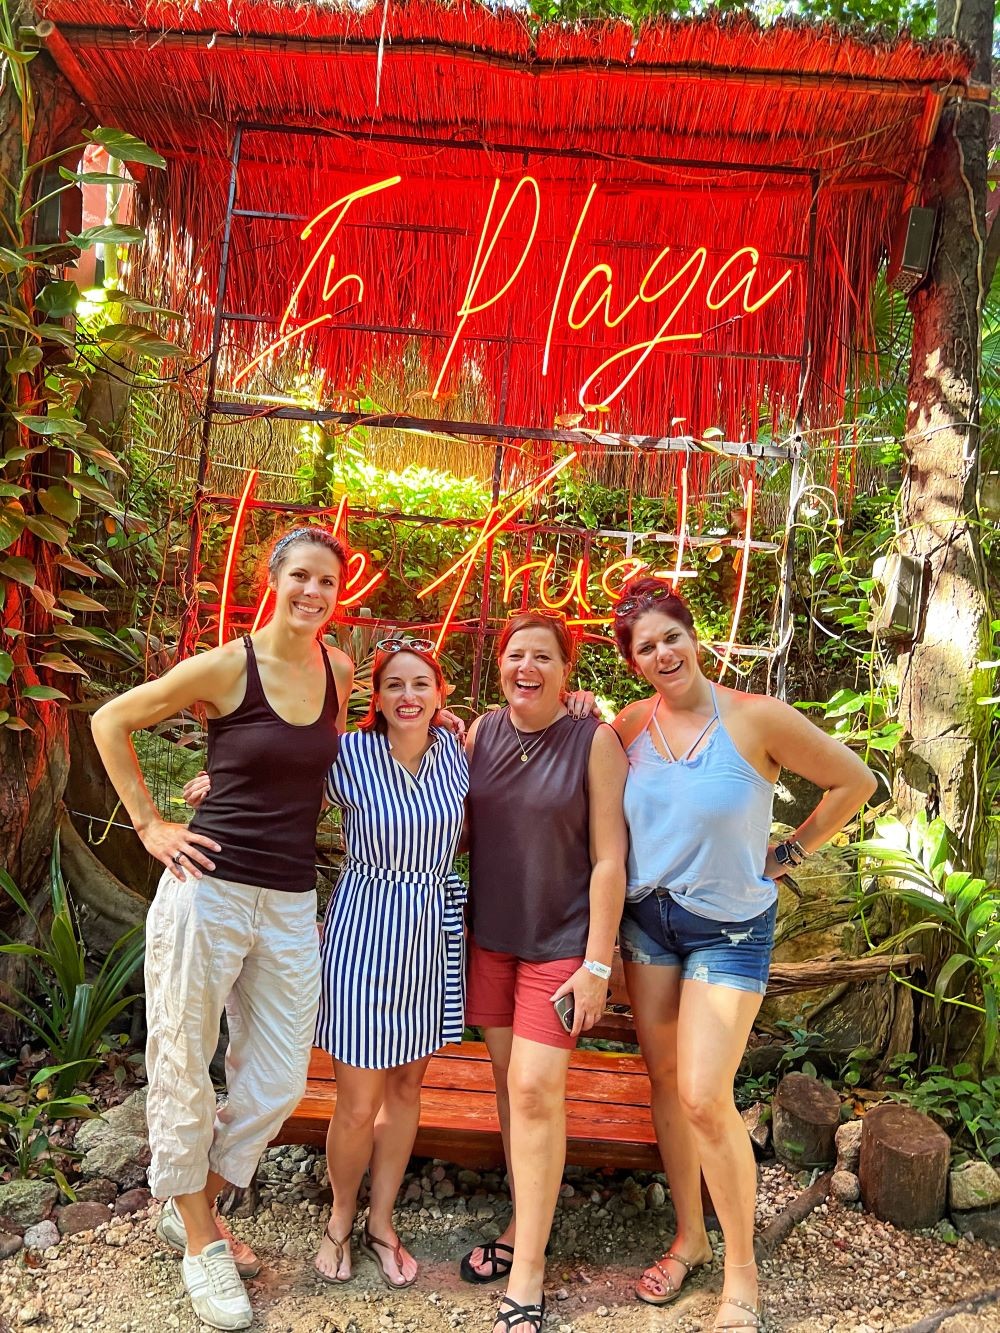 Team Achieve visiting the local area of Playa del Carmen, Mexico ahead of our big event 